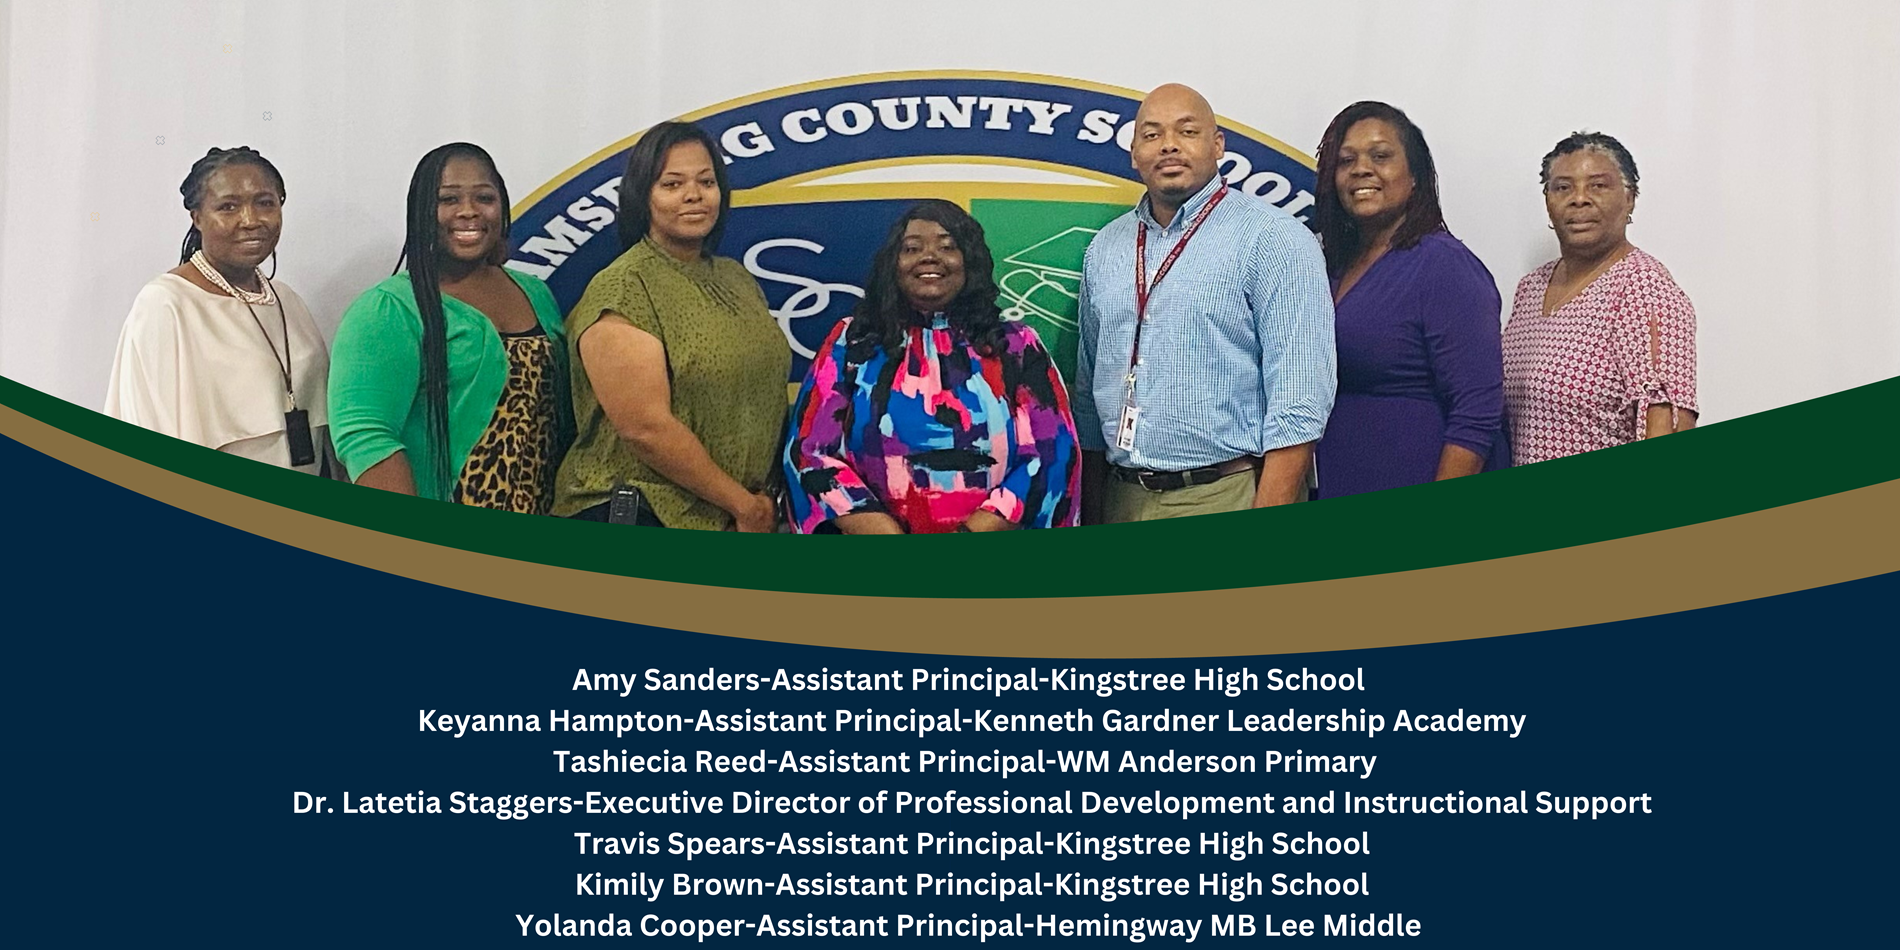 amy sanders-assistant principal-kingstree high school. keyanna hampton-assistant principal-kenneth gardner leadership academy. tashiecia reed-assistant principal-wm anderson primary. dr. latetia staggers-executive director of professional development and instructional support. travis spears-assistant principal-kingstree high school. kimily brown-assistant principal-kingstree high school. yolanda cooper-assistant principal-hemingway mb lee middle 